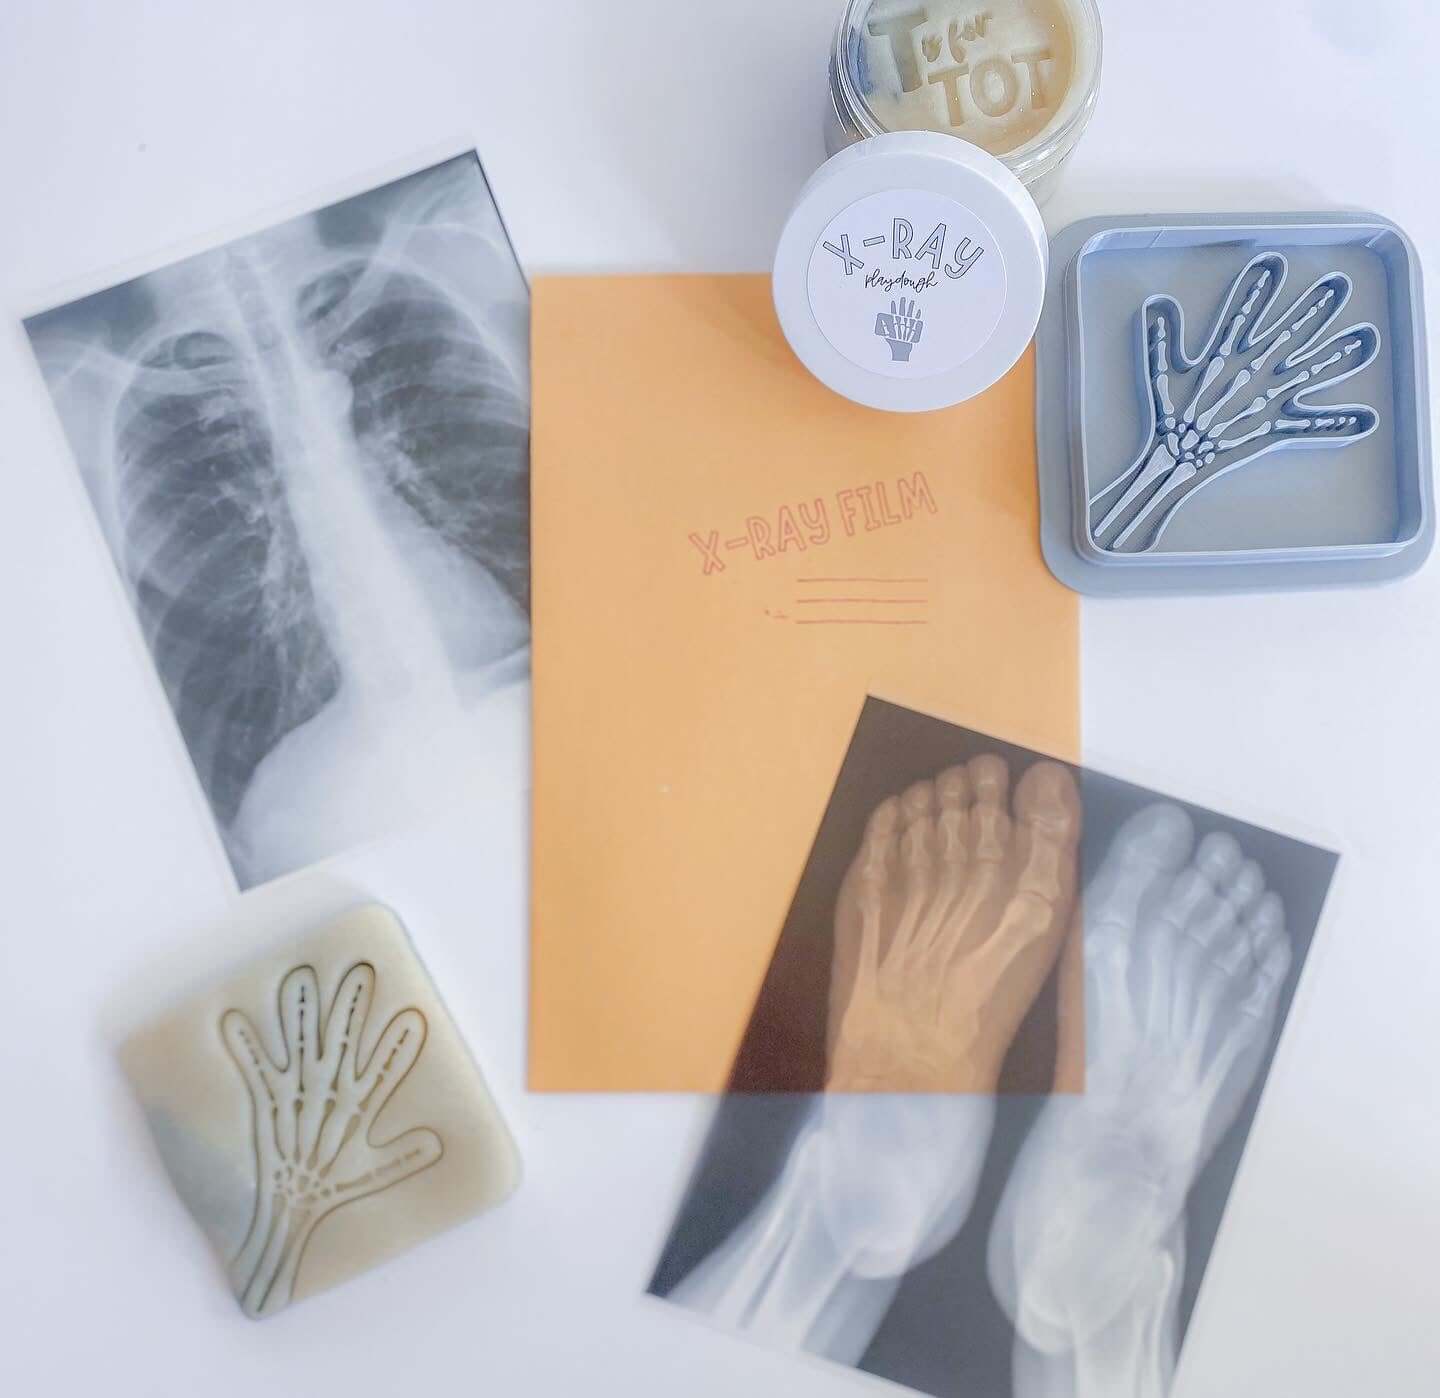 Learn about the human body with this educational play and learn kit for children aged 3-6. Includes a book, working stethoscope, playdough x-ray cutter, lung experiment, and a playdough mat for organ placement.